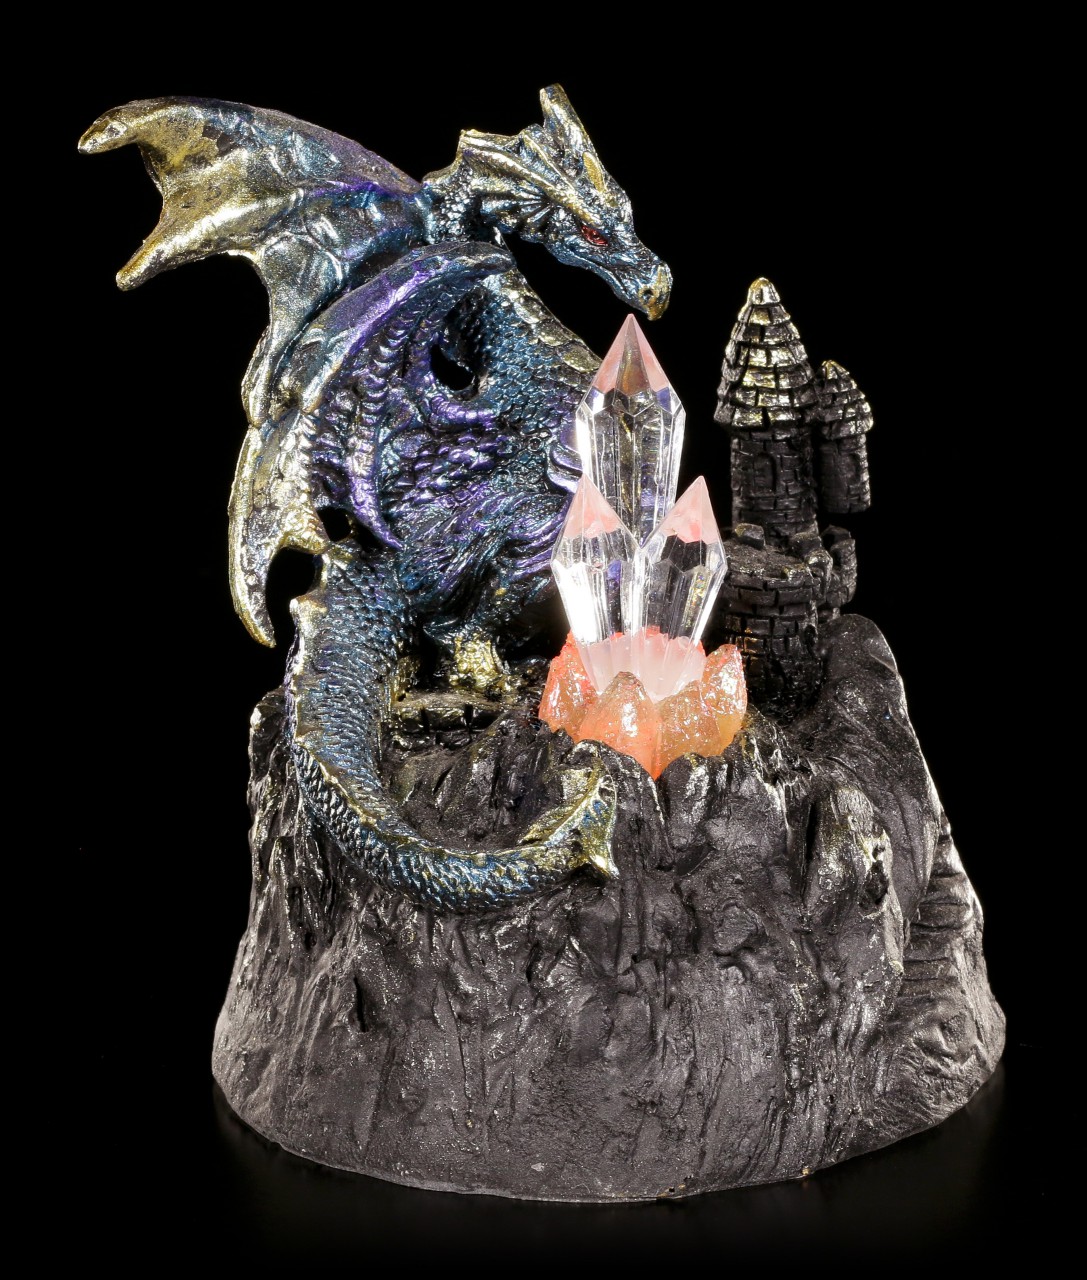 Blue Dragon Figurine on Castle with Crystal and LED